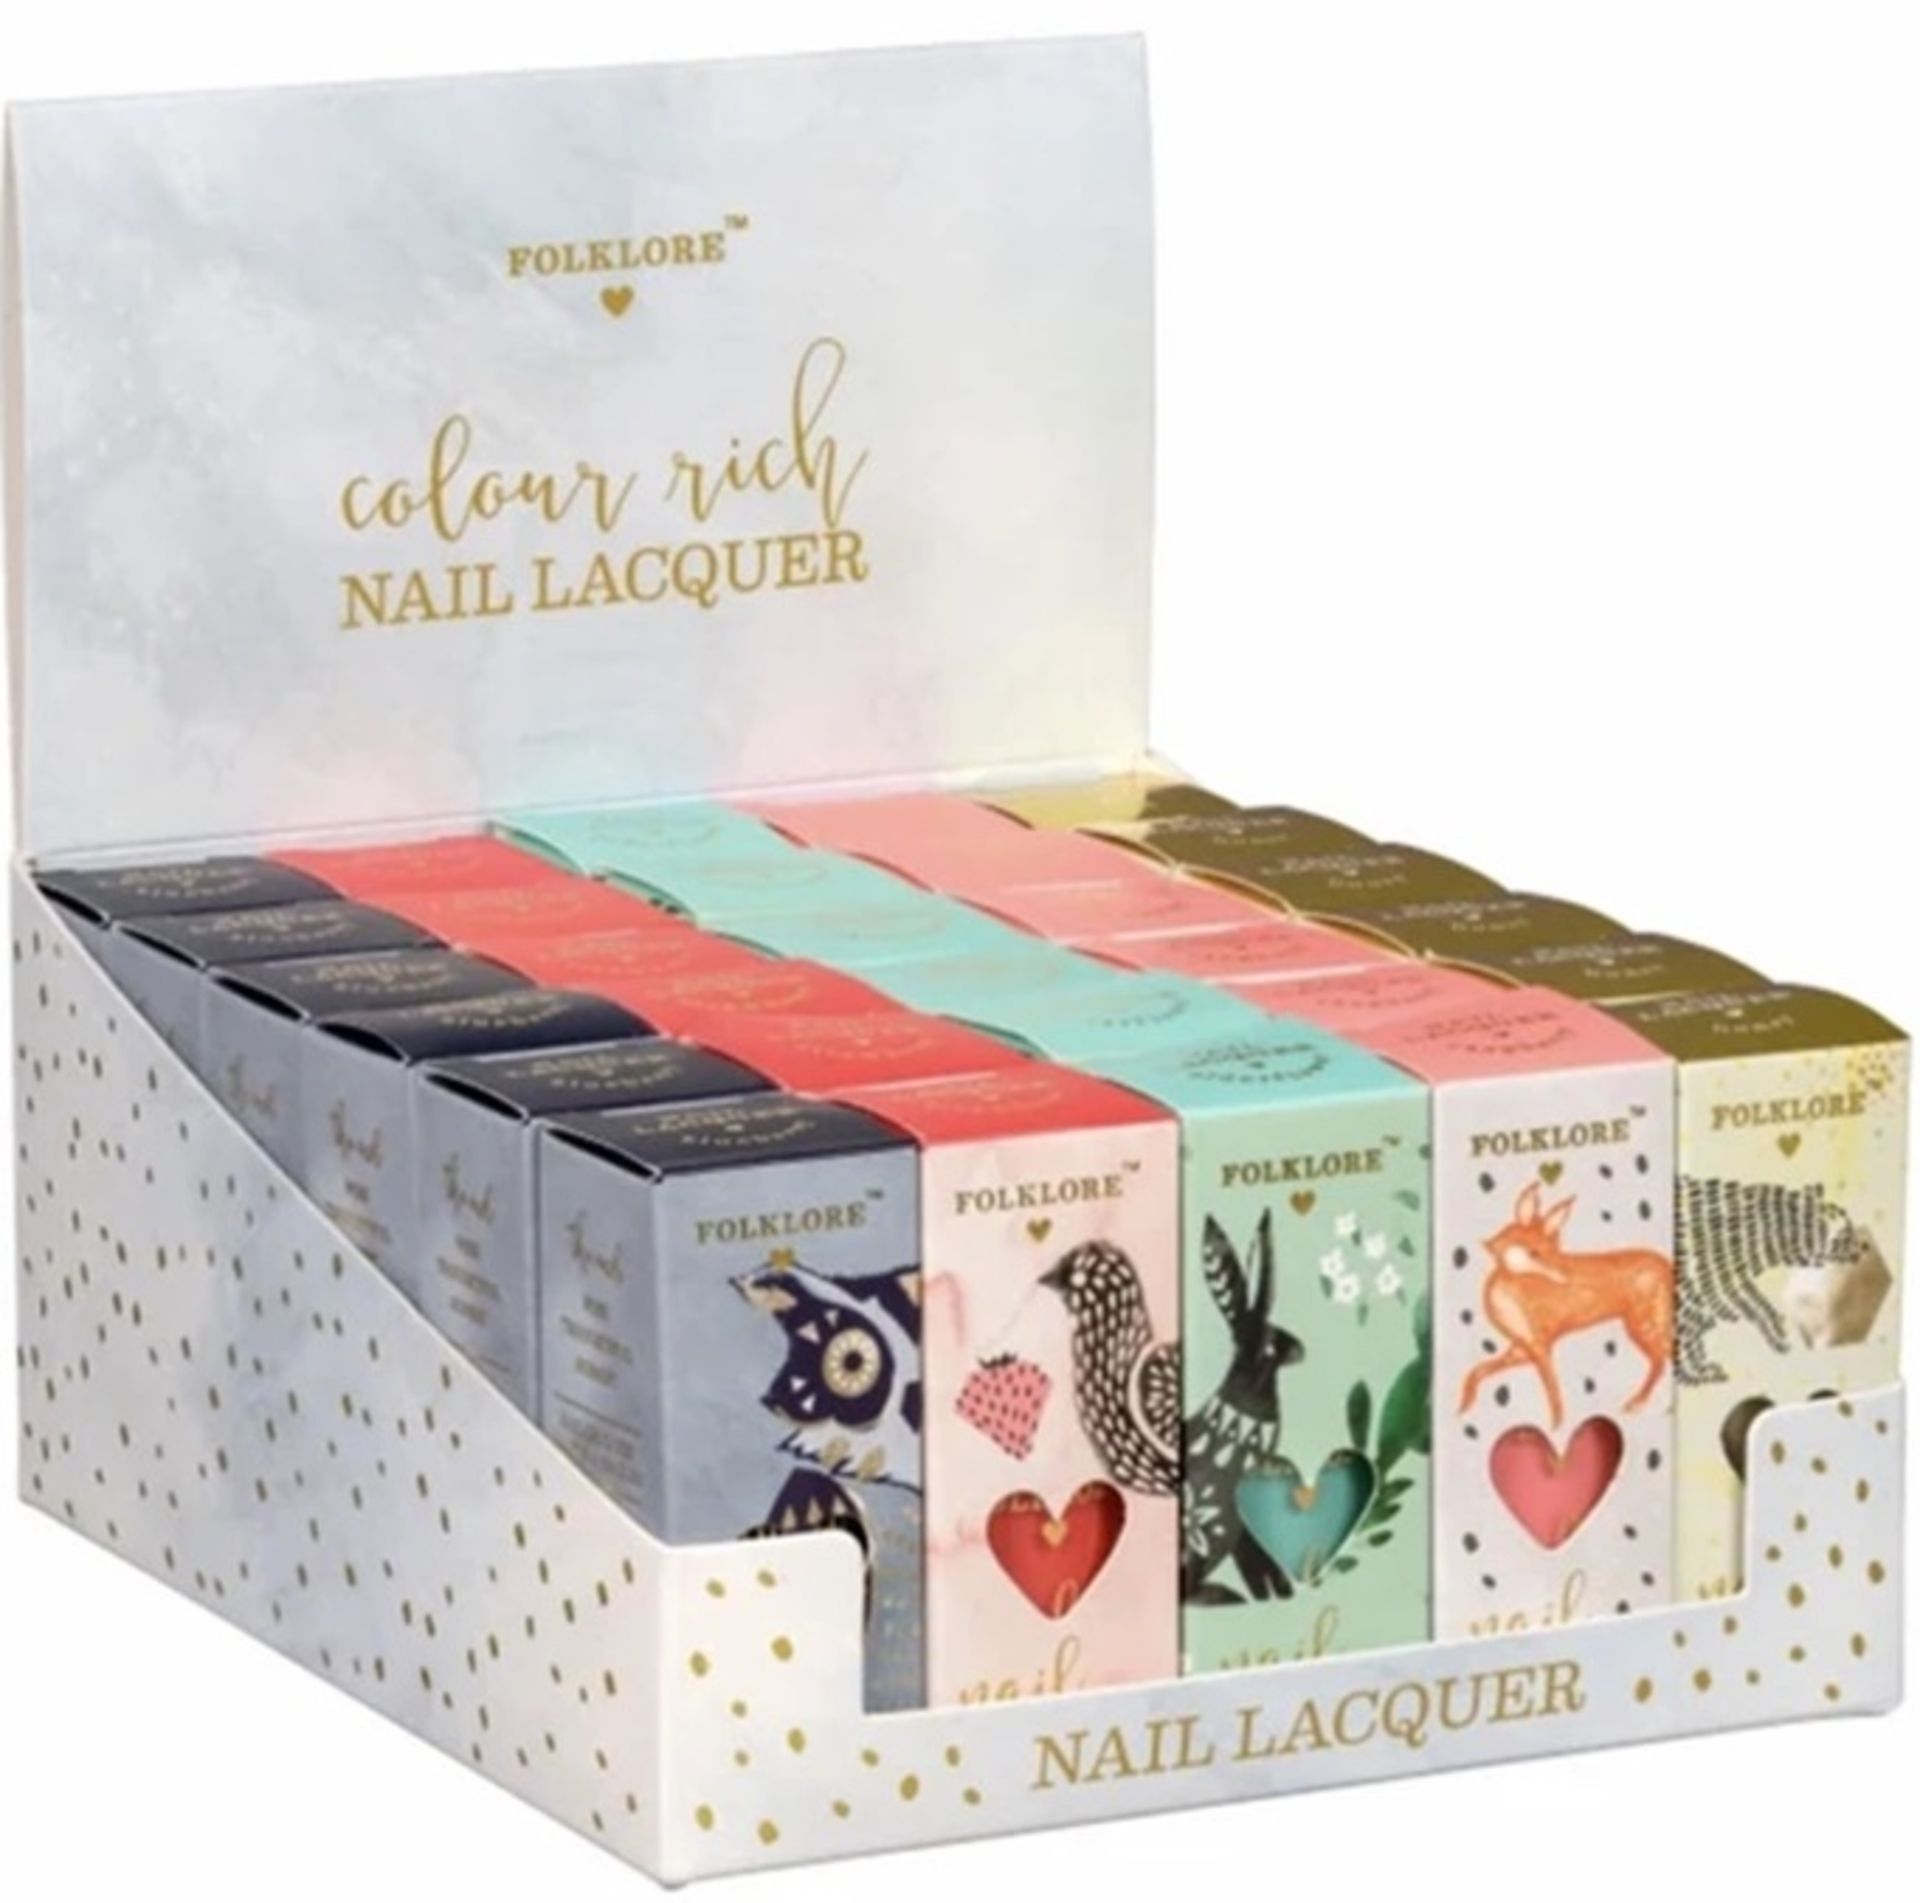 100 x Various Folklore Nail Lacquer | 13ml | Total RRP £499 - Image 2 of 4